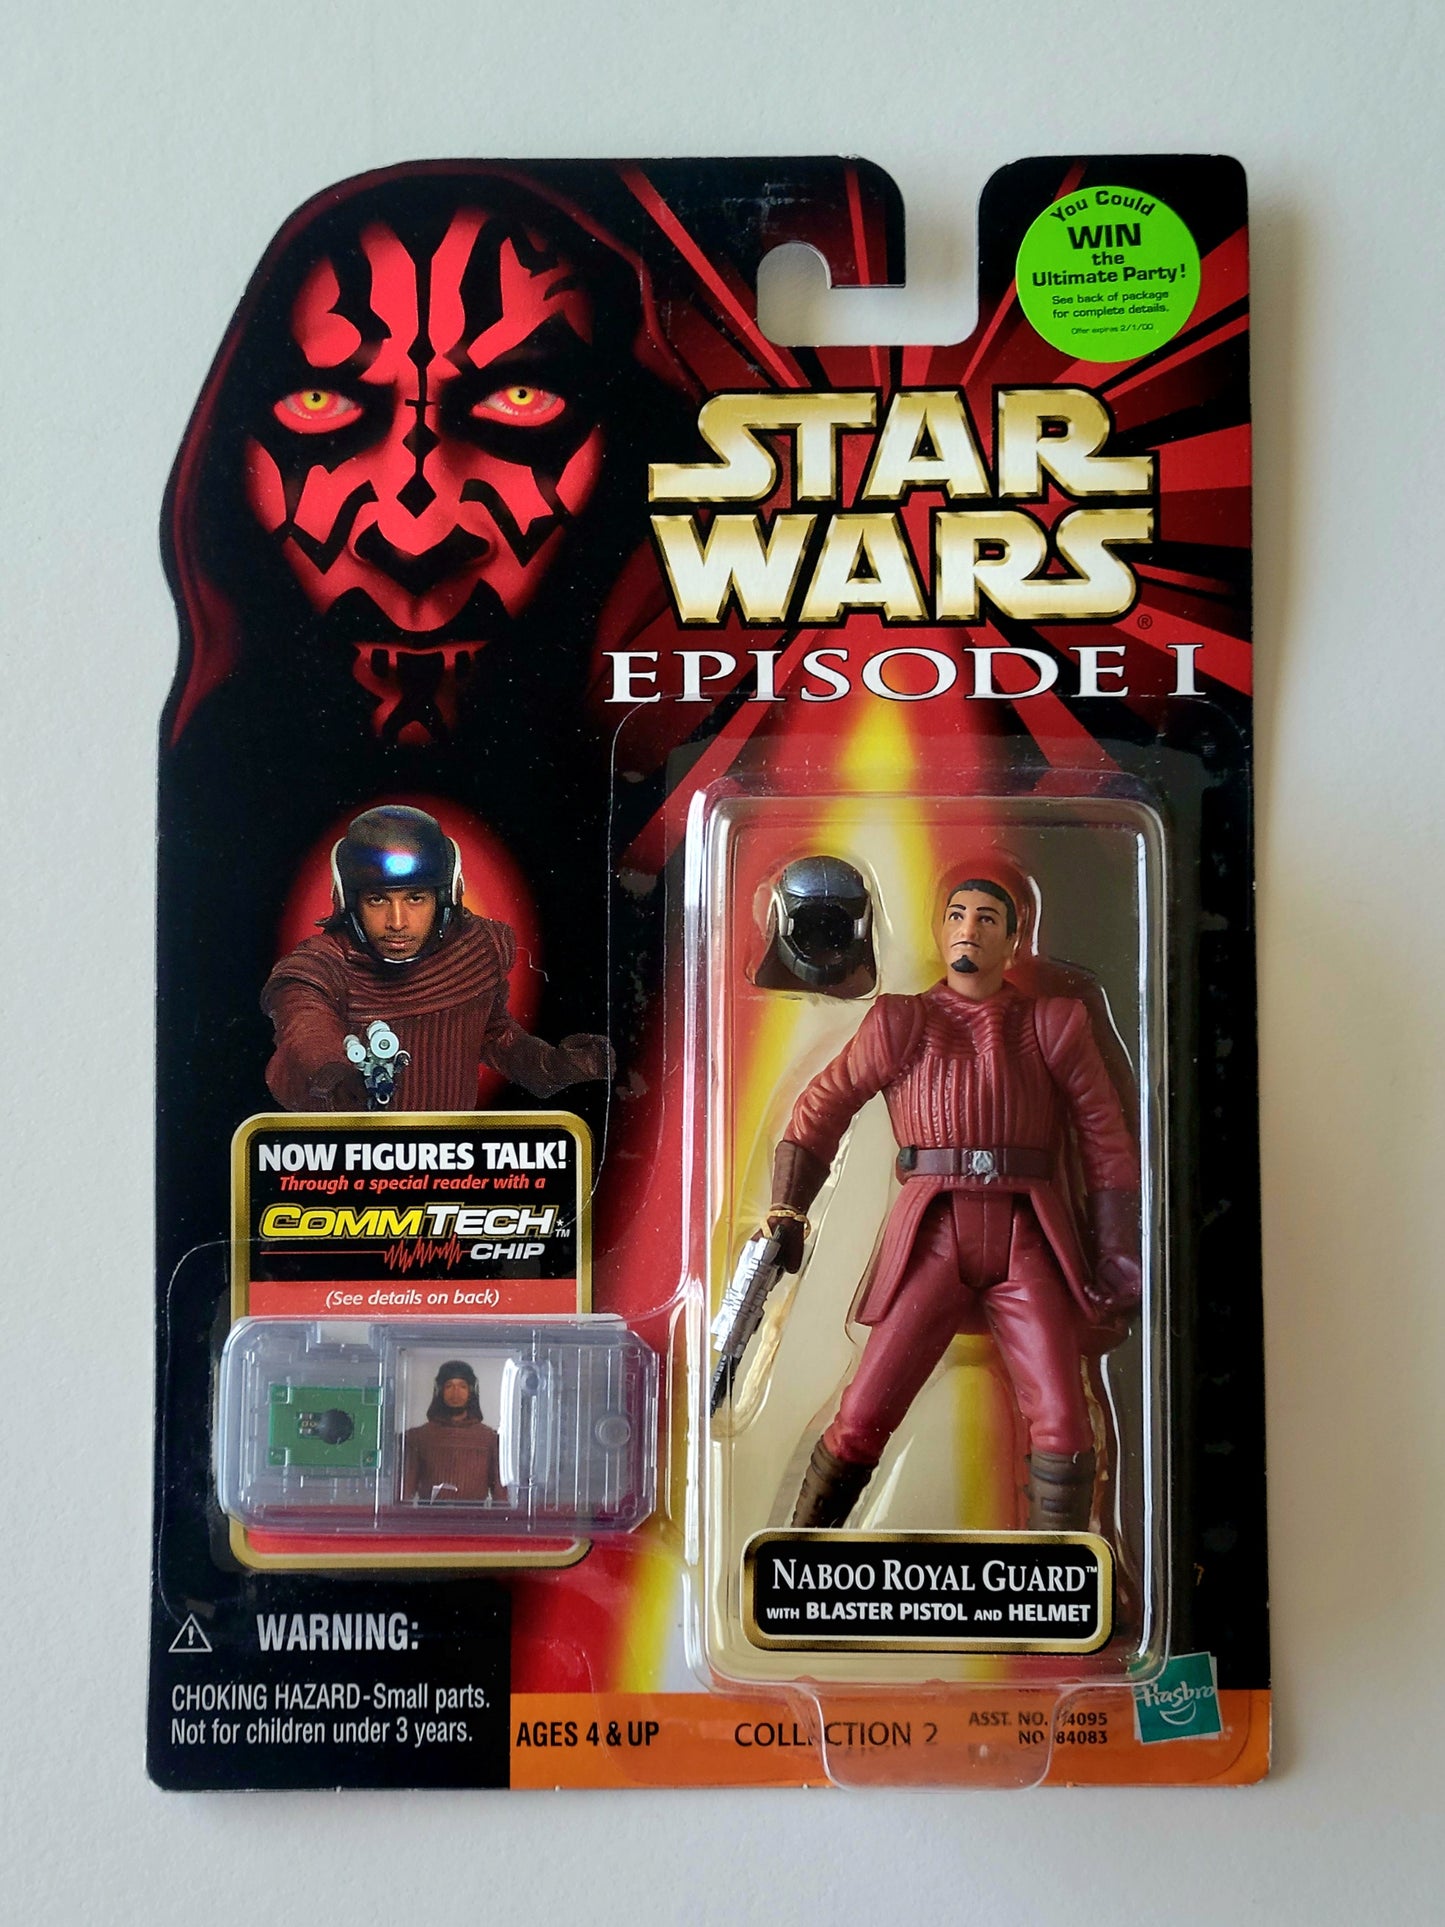 Star Wars: Episode 1 Naboo Royal Guard 3.75-Inch Action Figure